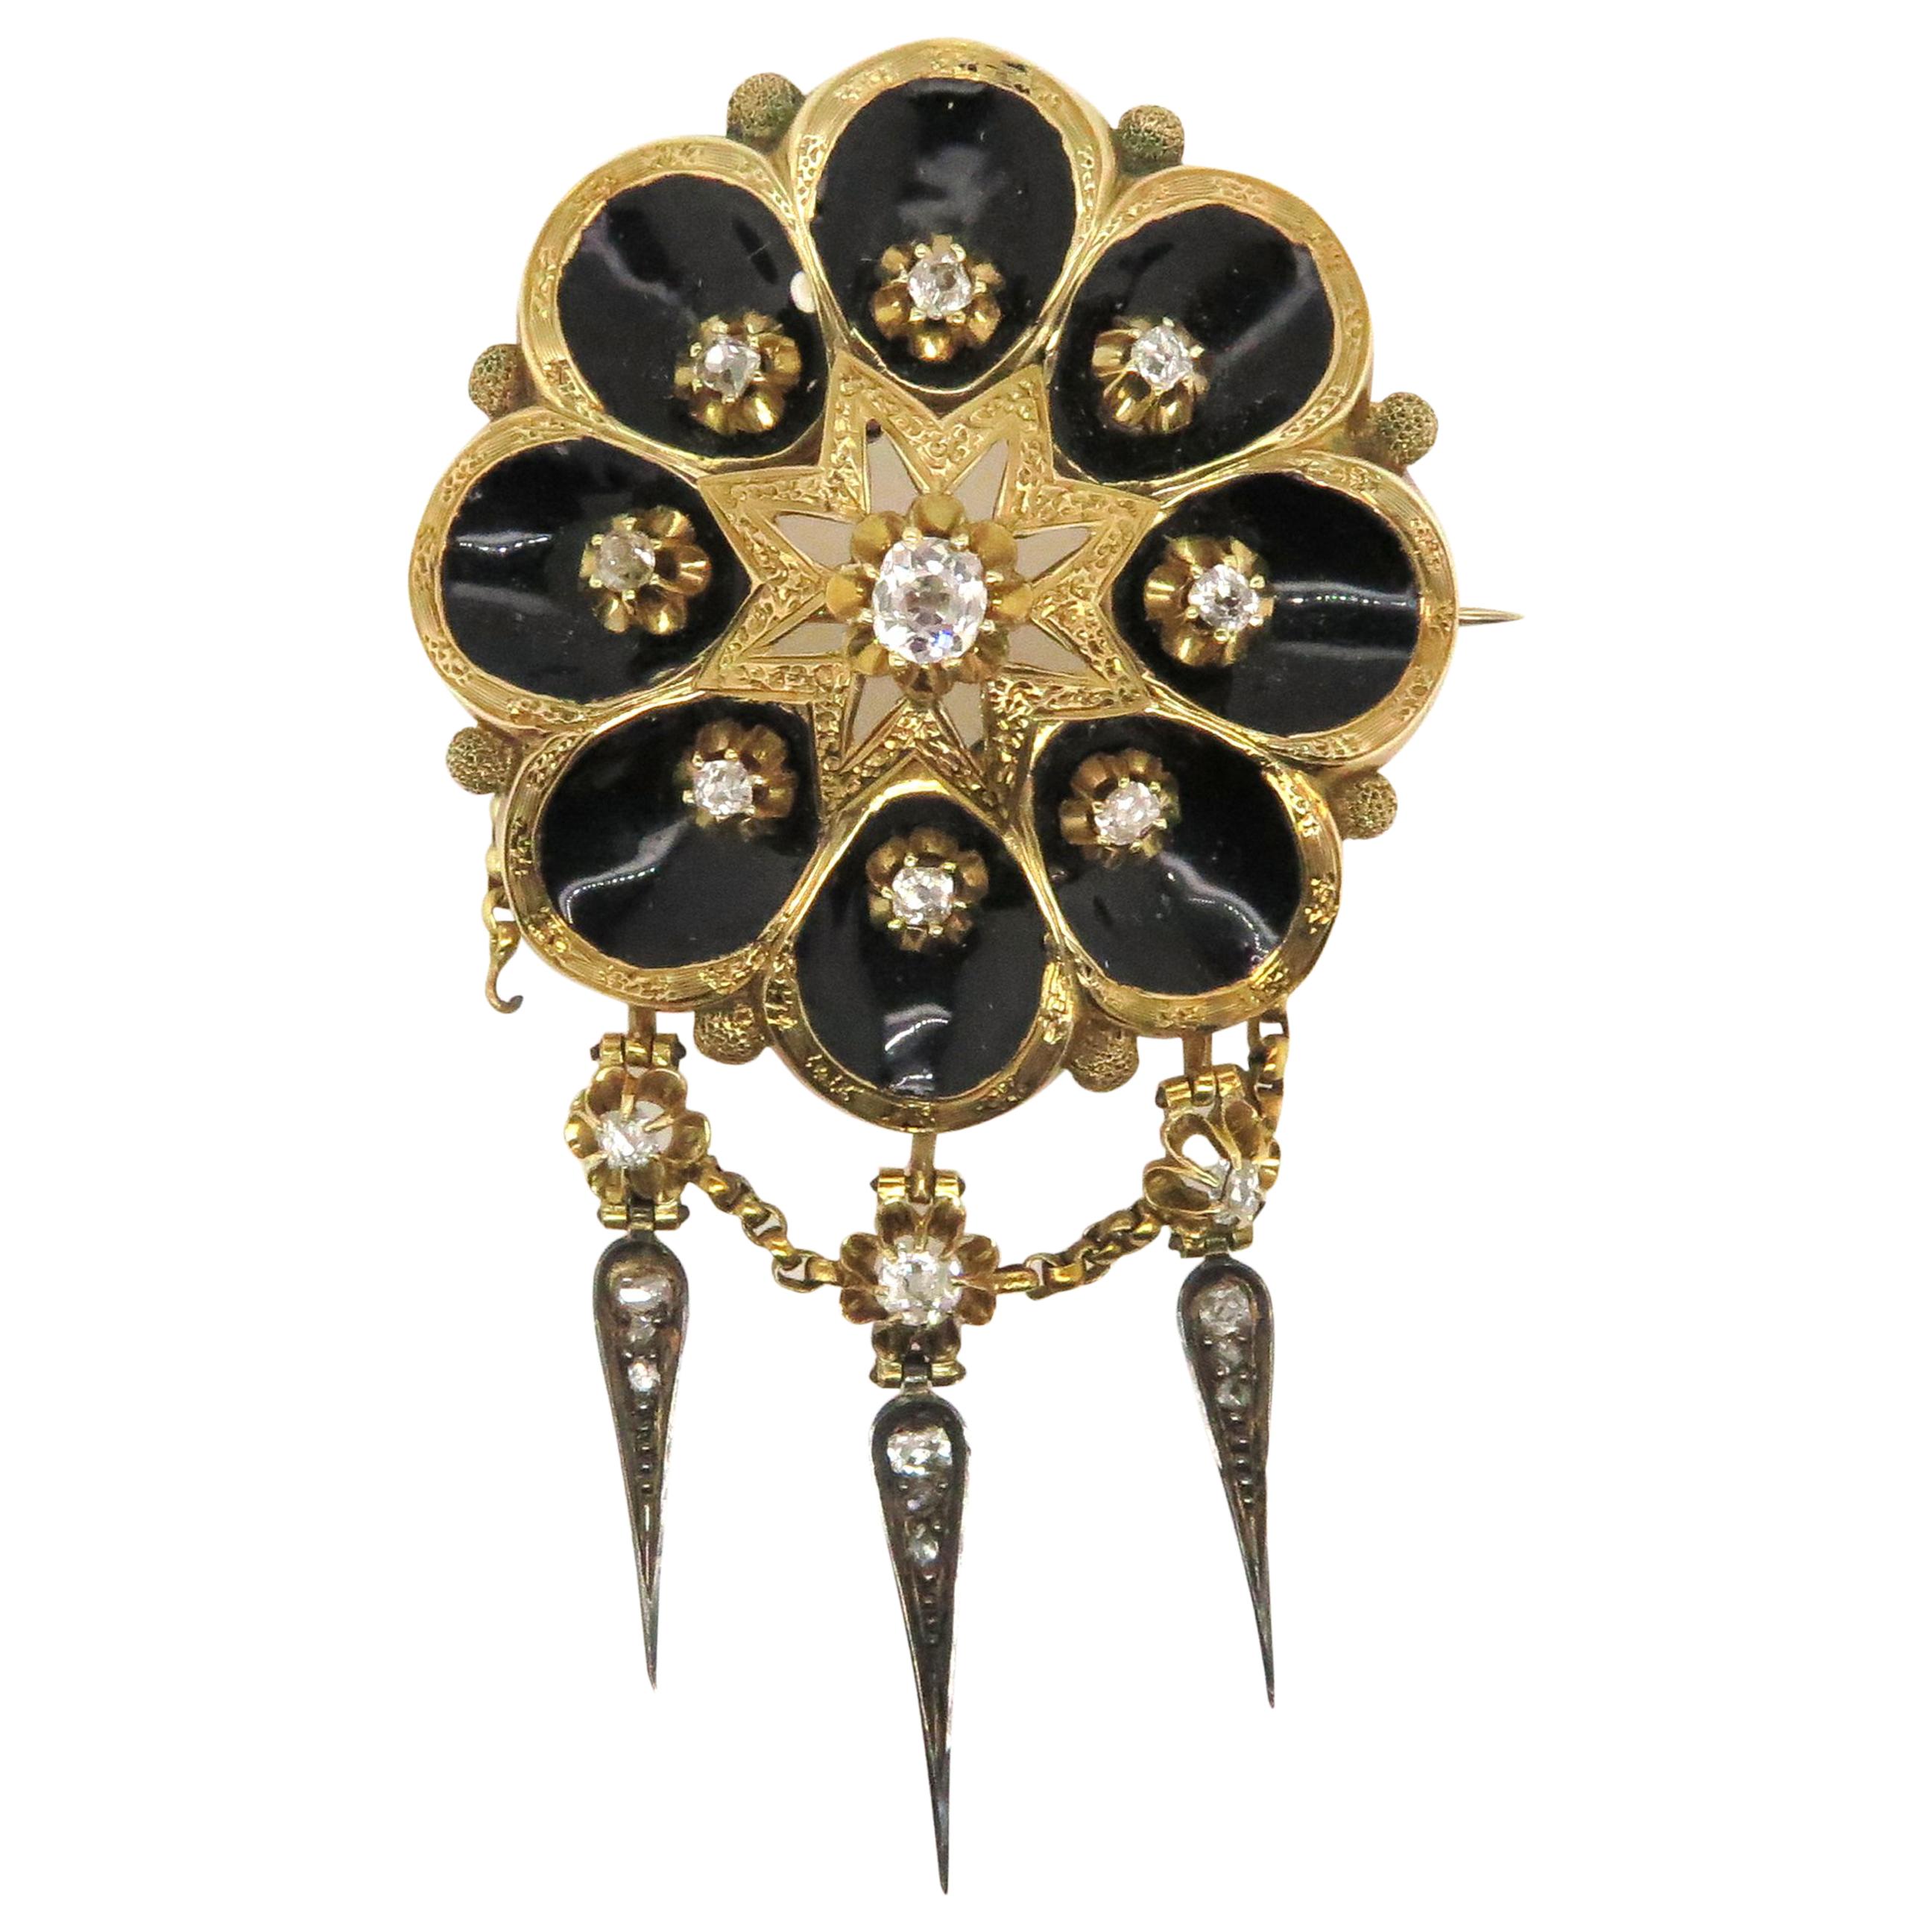 14 Carat Gold 1870s Victorian Mourning Brooch 1.44 Carat Diamond and Enamel For Sale